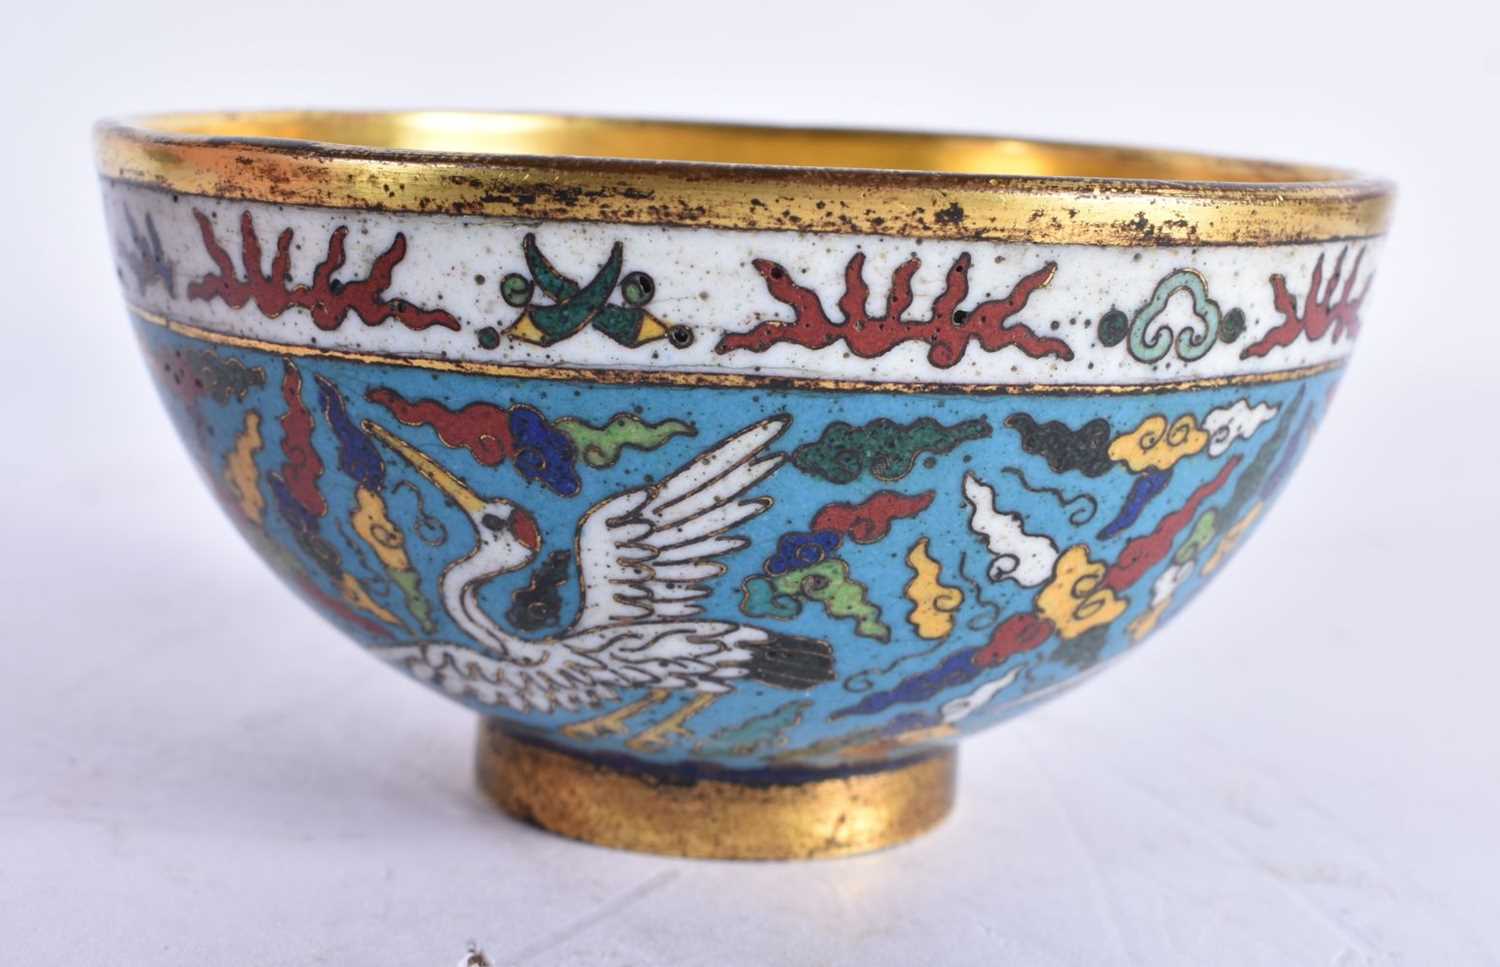 A FINE PAIR OF CLOISONNE ENAMEL BRONZE BOWLS Jiajing mark and probably of the period, decorated on a - Image 5 of 16